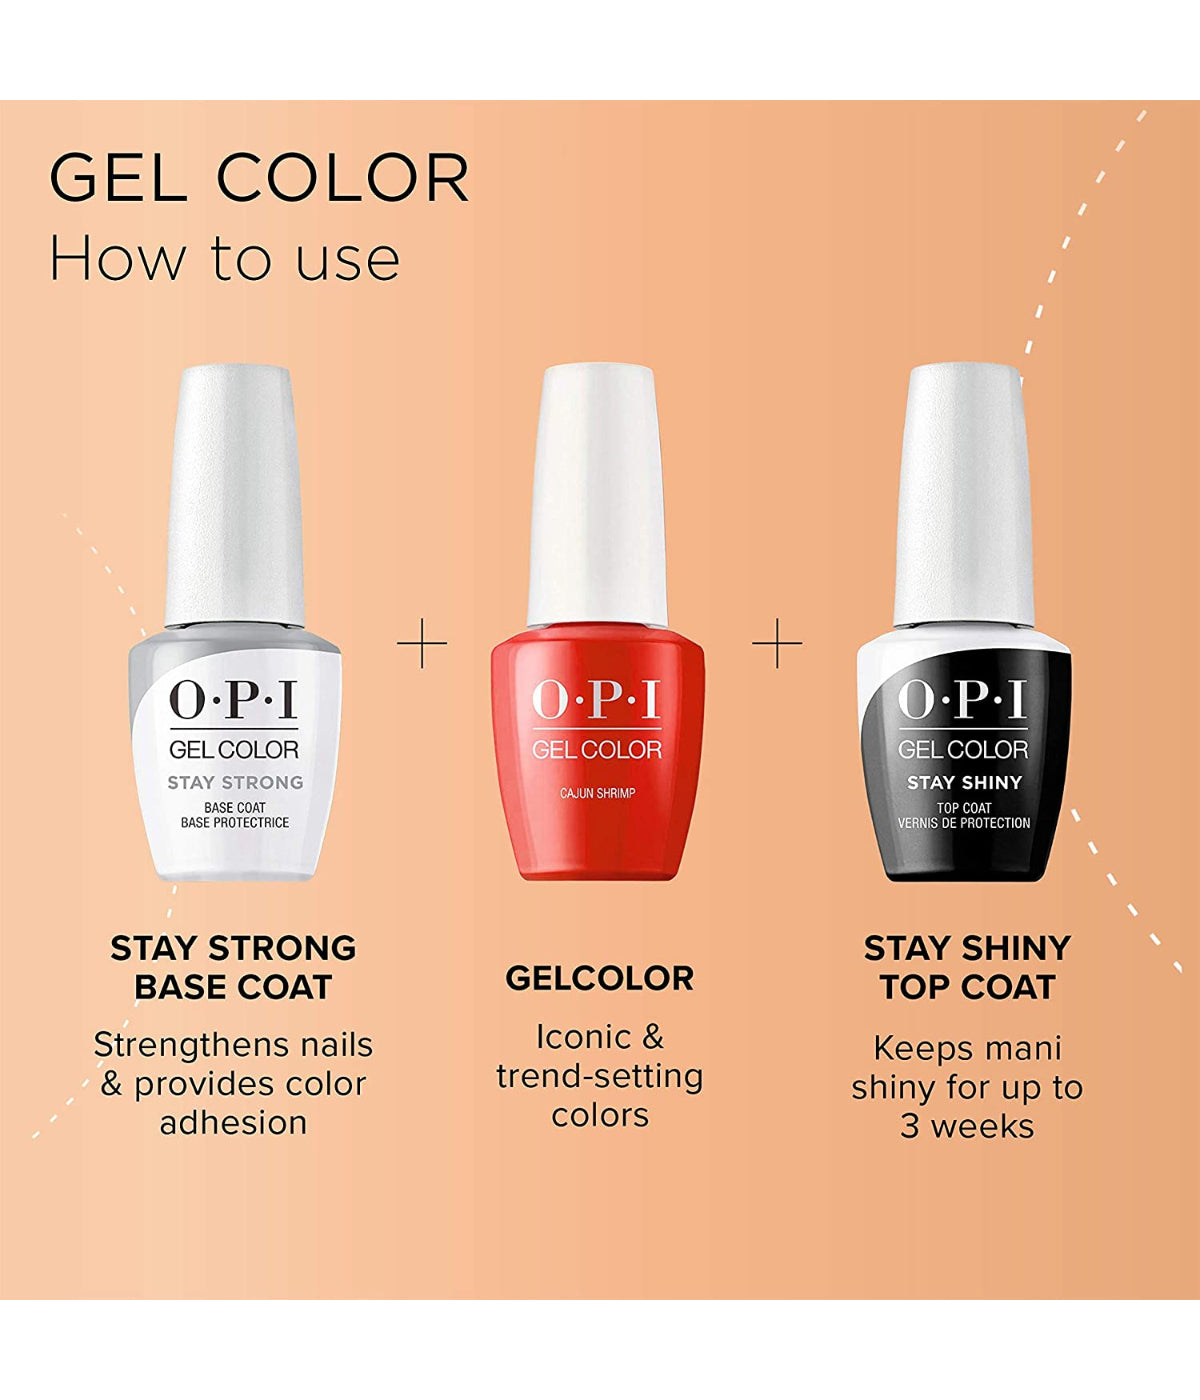 OPI GelColor, Classics Collection, Never a Dulles Moment, 15mL